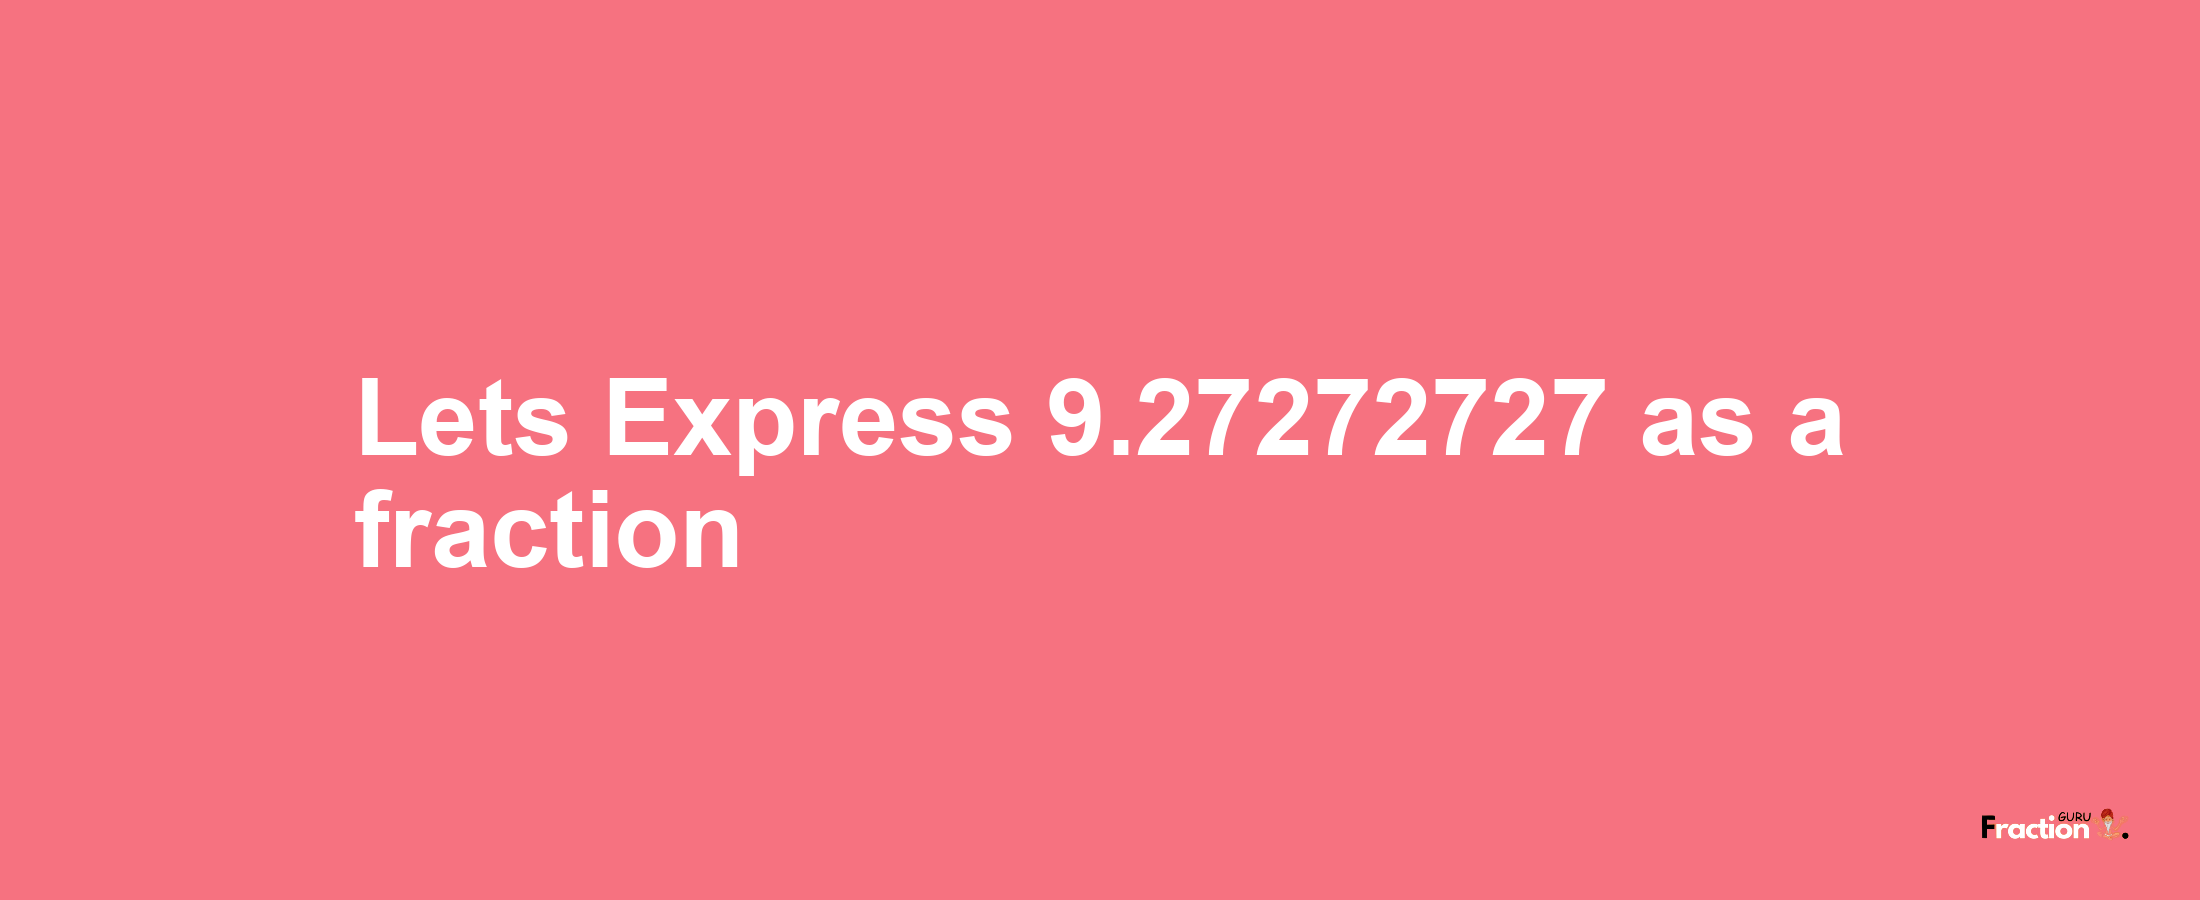 Lets Express 9.27272727 as afraction